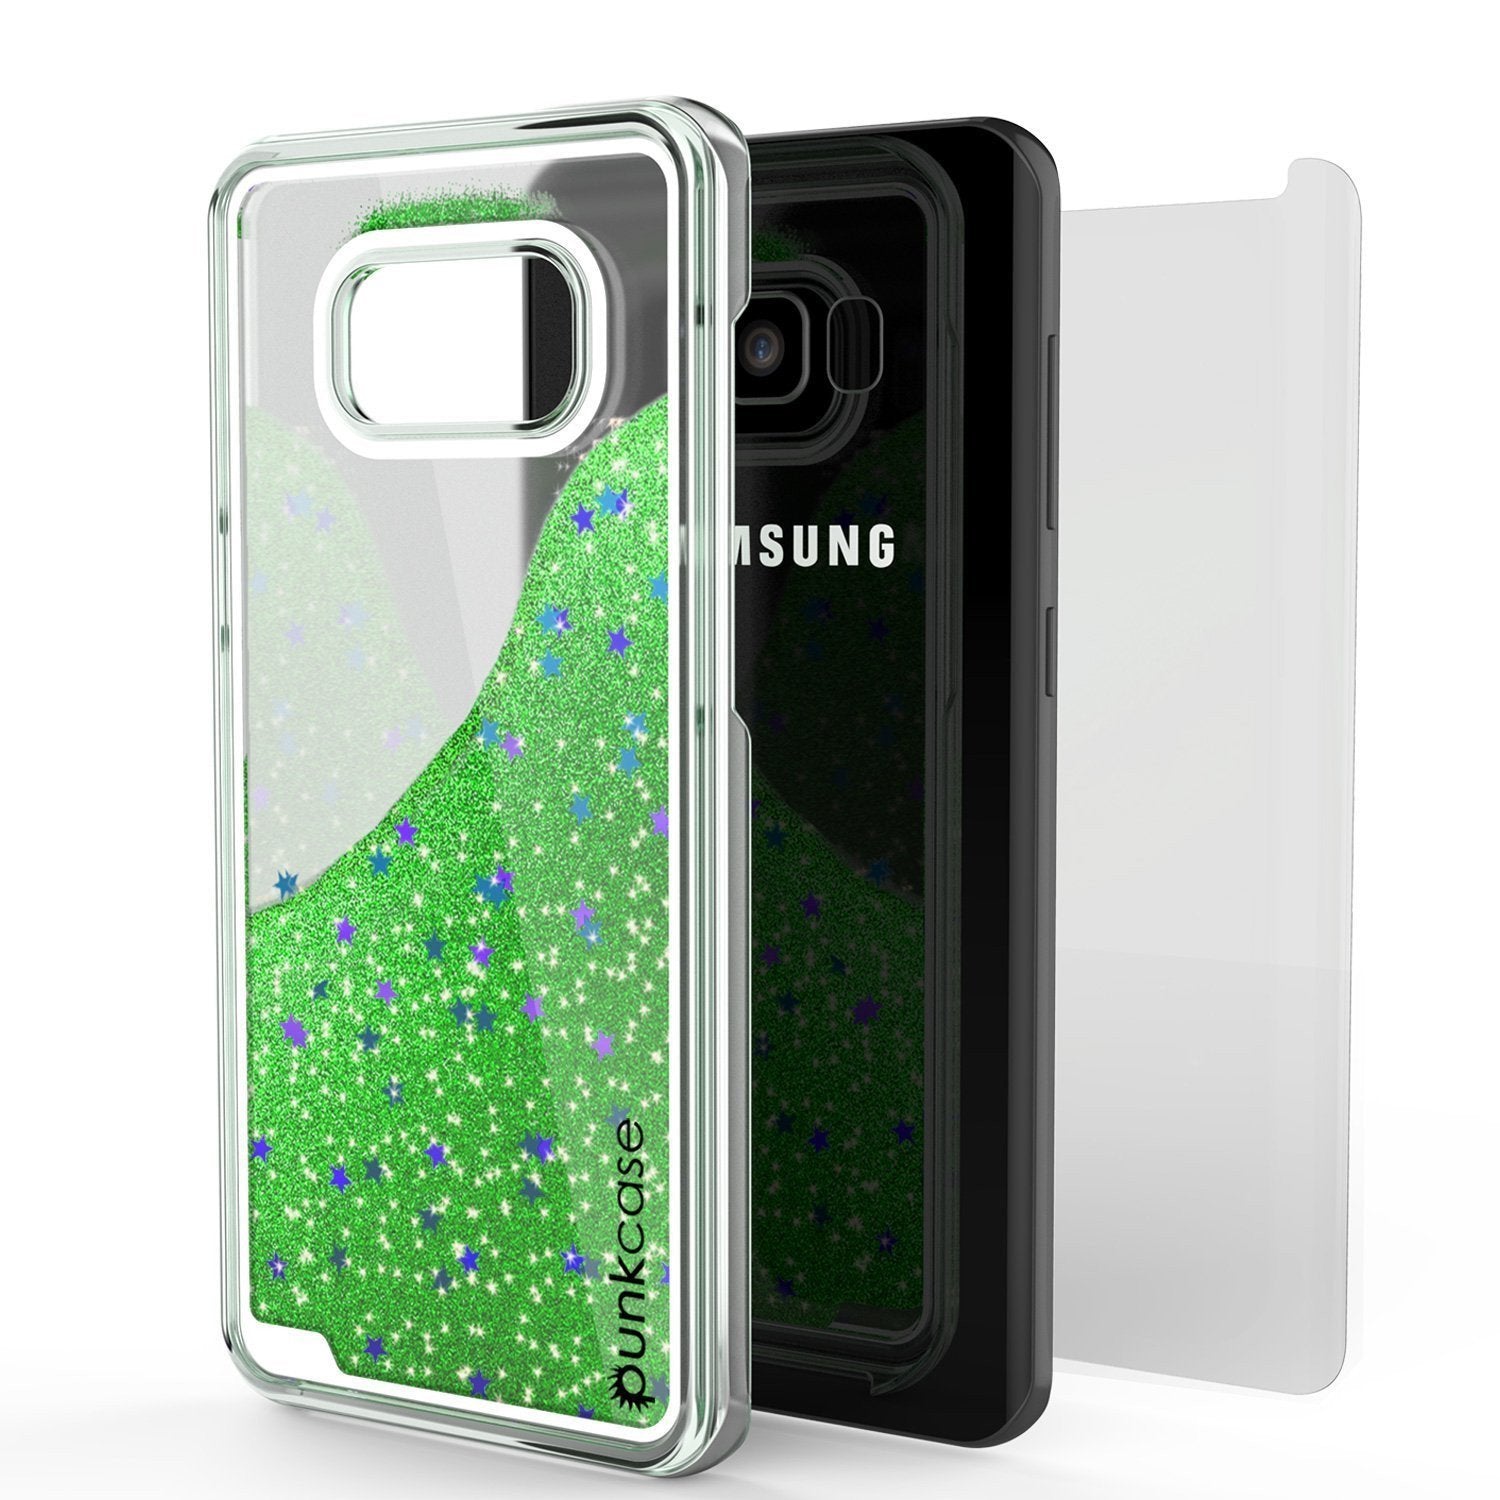 S8 Plus Case, Punkcase [Liquid Series] Protective Dual Layer Floating Glitter Cover with lots of Bling & Sparkle + PunkShield Screen Protector for Samsungs Galaxy S8+ [Green] - PunkCase NZ